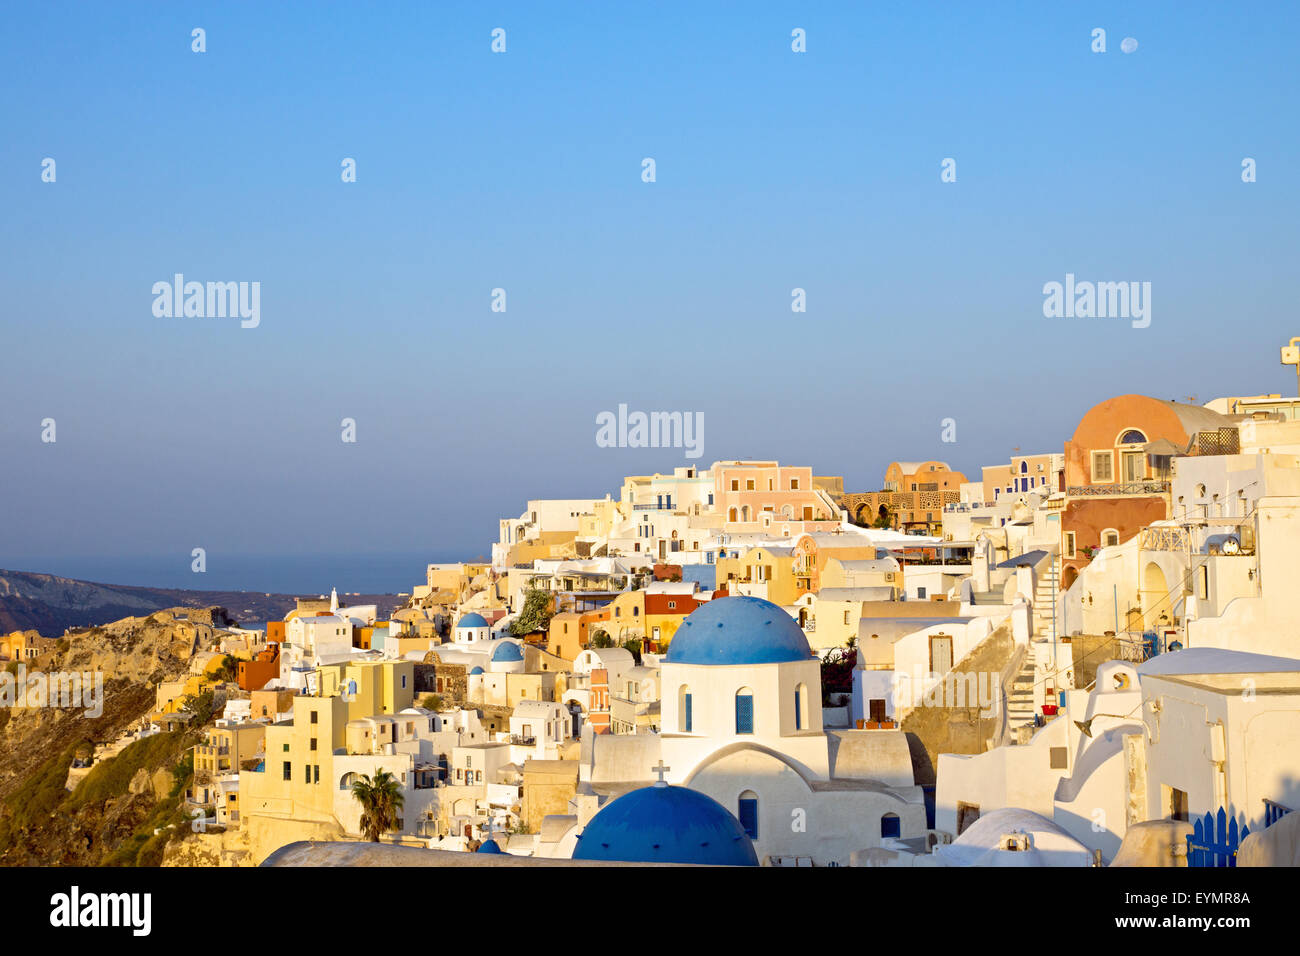 The beautiful village Oia on Santorini island in the early morning hours Stock Photo